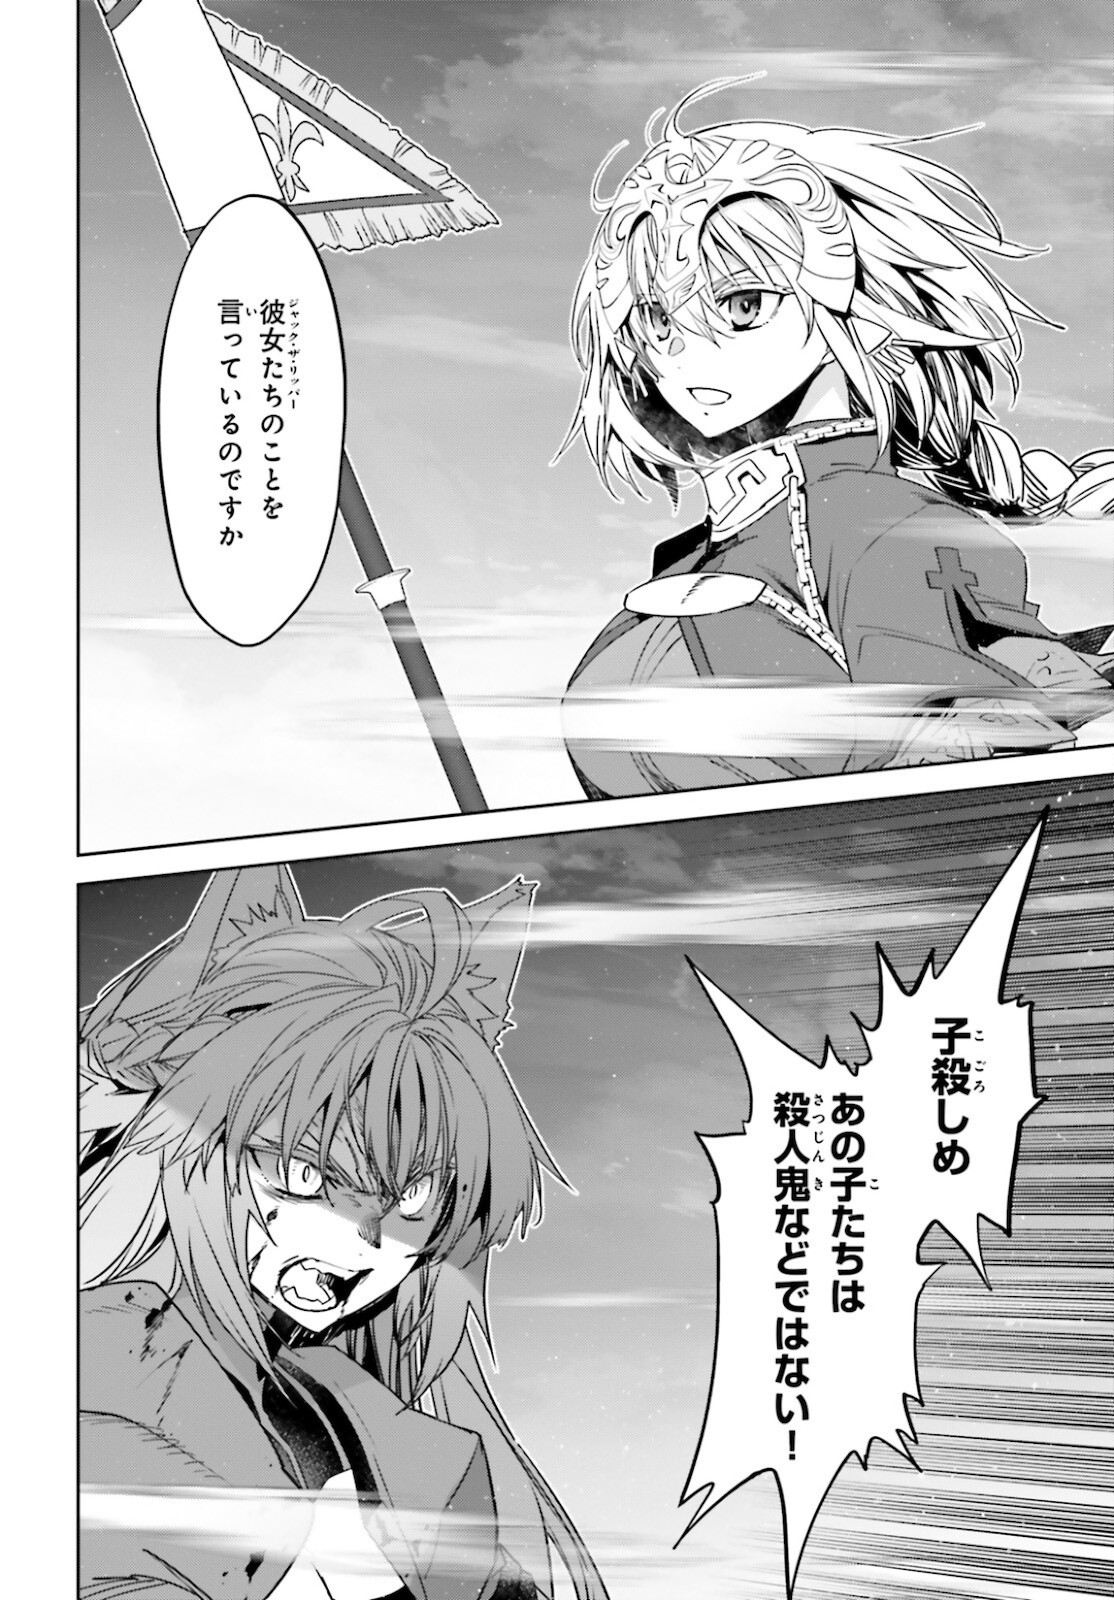 Fate-Apocrypha - Chapter 55-1 - Page 4